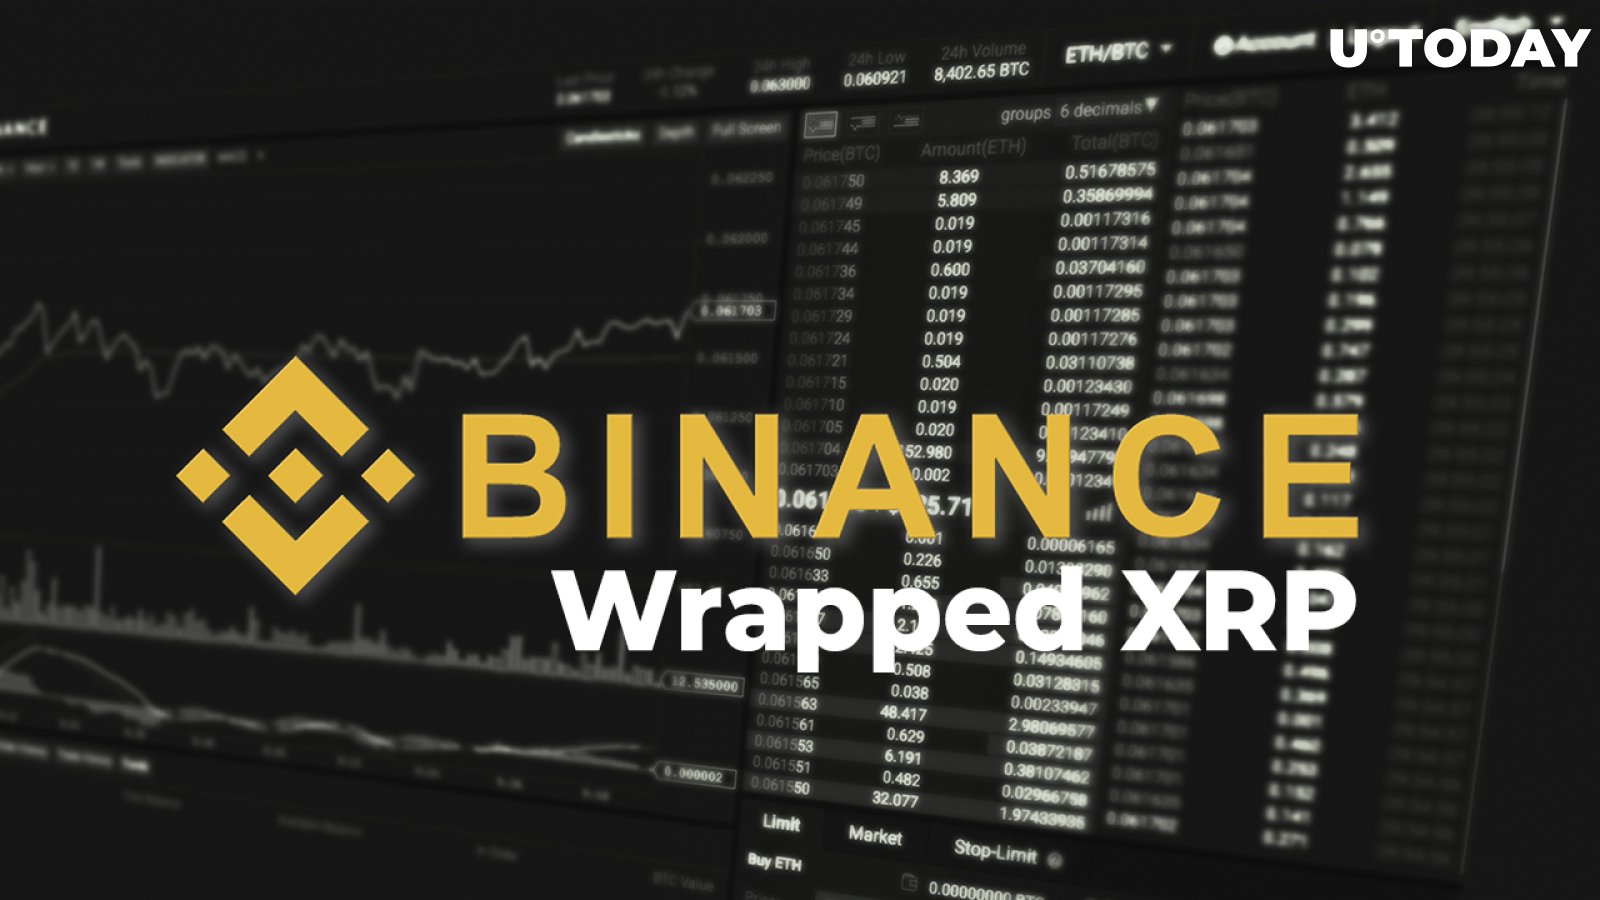 wXRP Added by Binance, Deposits and Trading Are Open